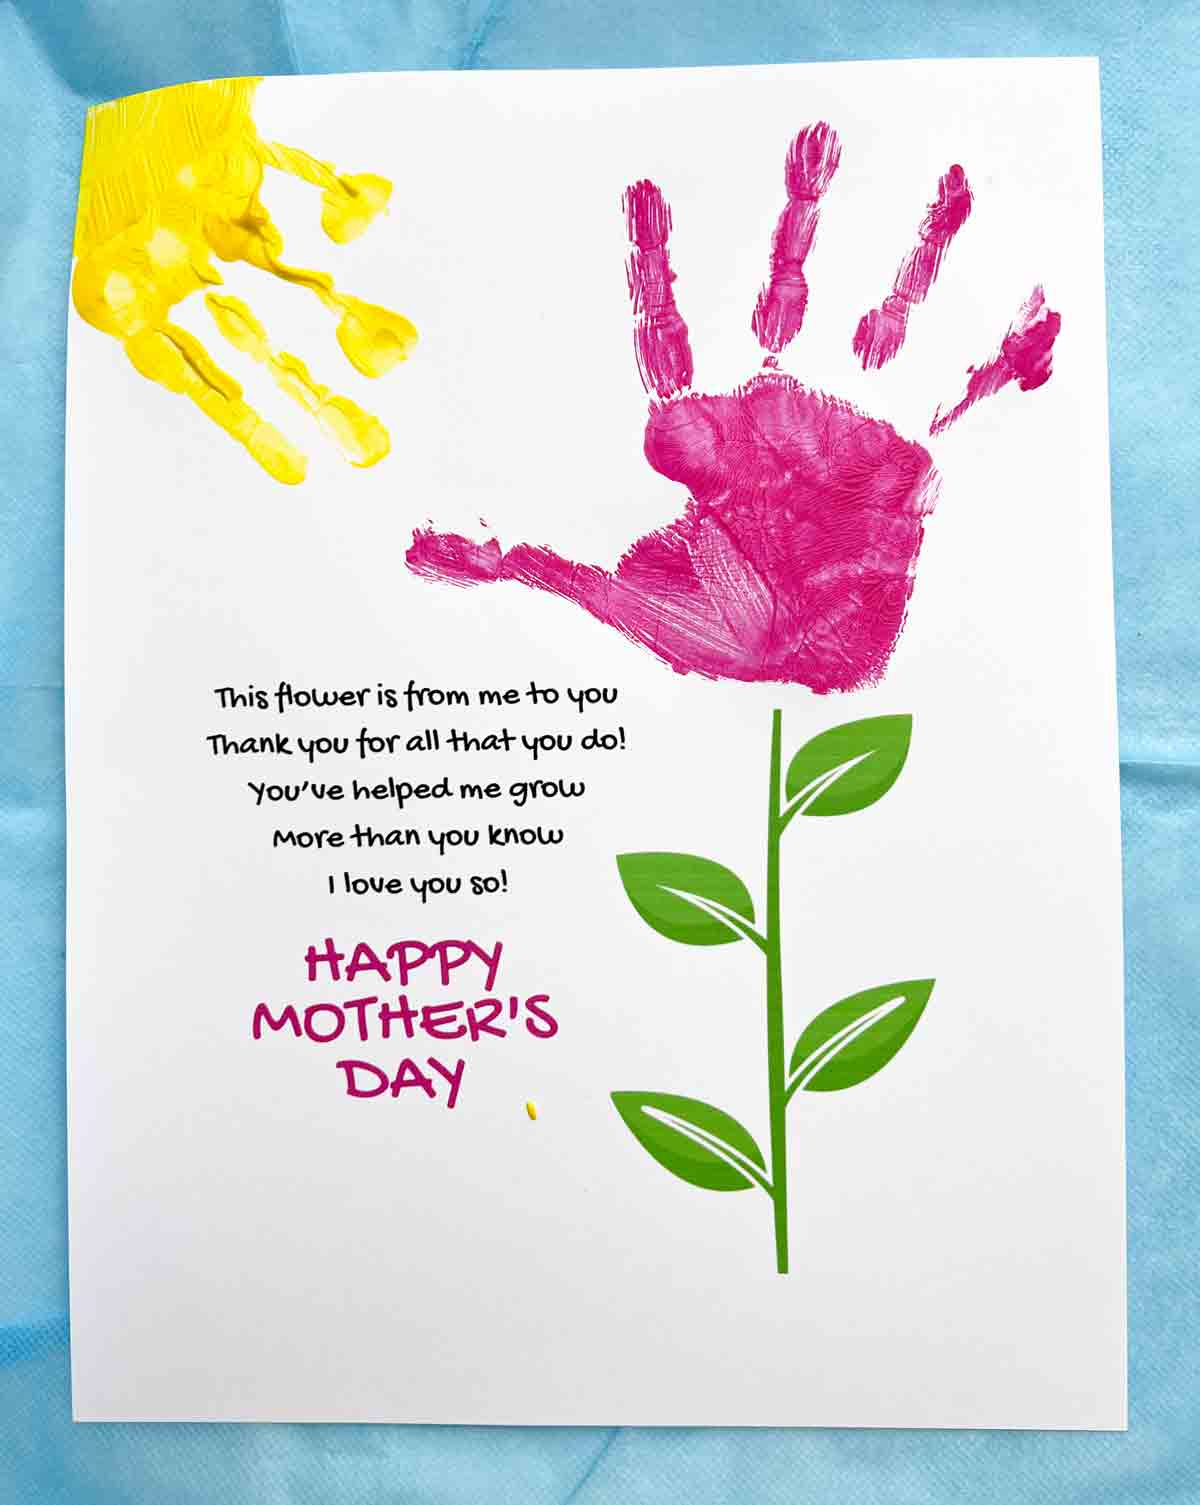 Final completion of handprint card.